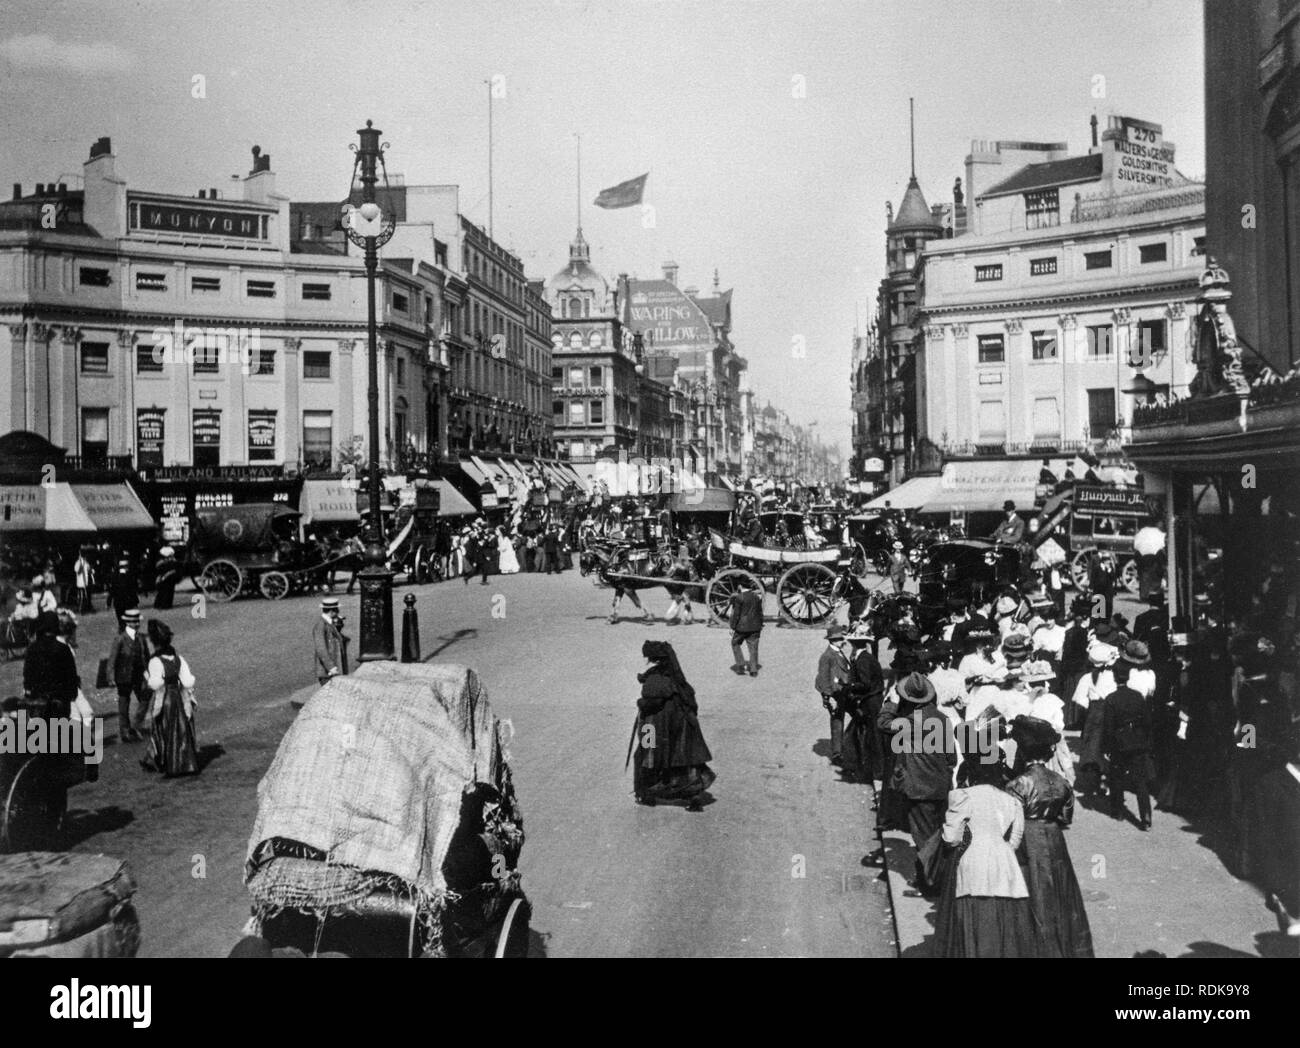 Late Victorian London. View down Oxford Street with the famous Waring and Gillow furniture makers store in the distance. The streets are full of people and horse drawn carriages. Stock Photo